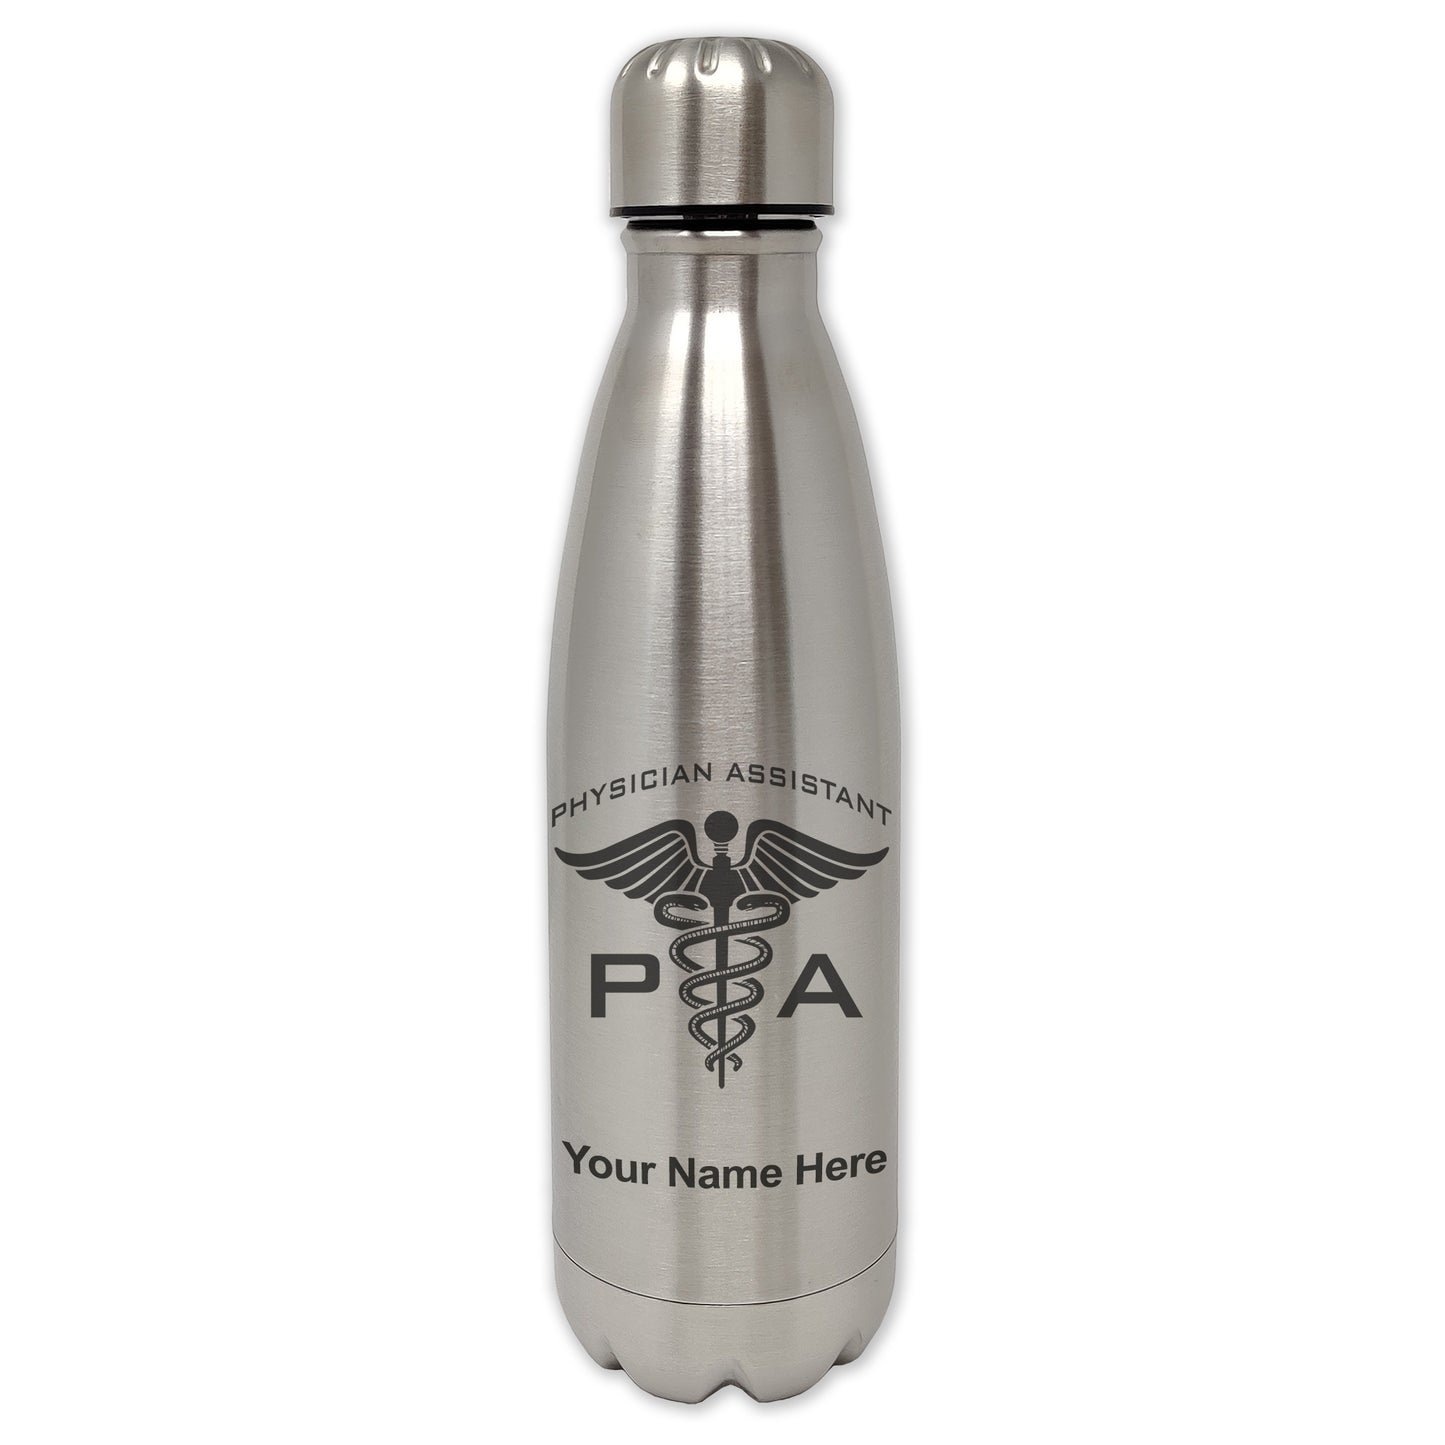 LaserGram Single Wall Water Bottle, PA Physician Assistant, Personalized Engraving Included